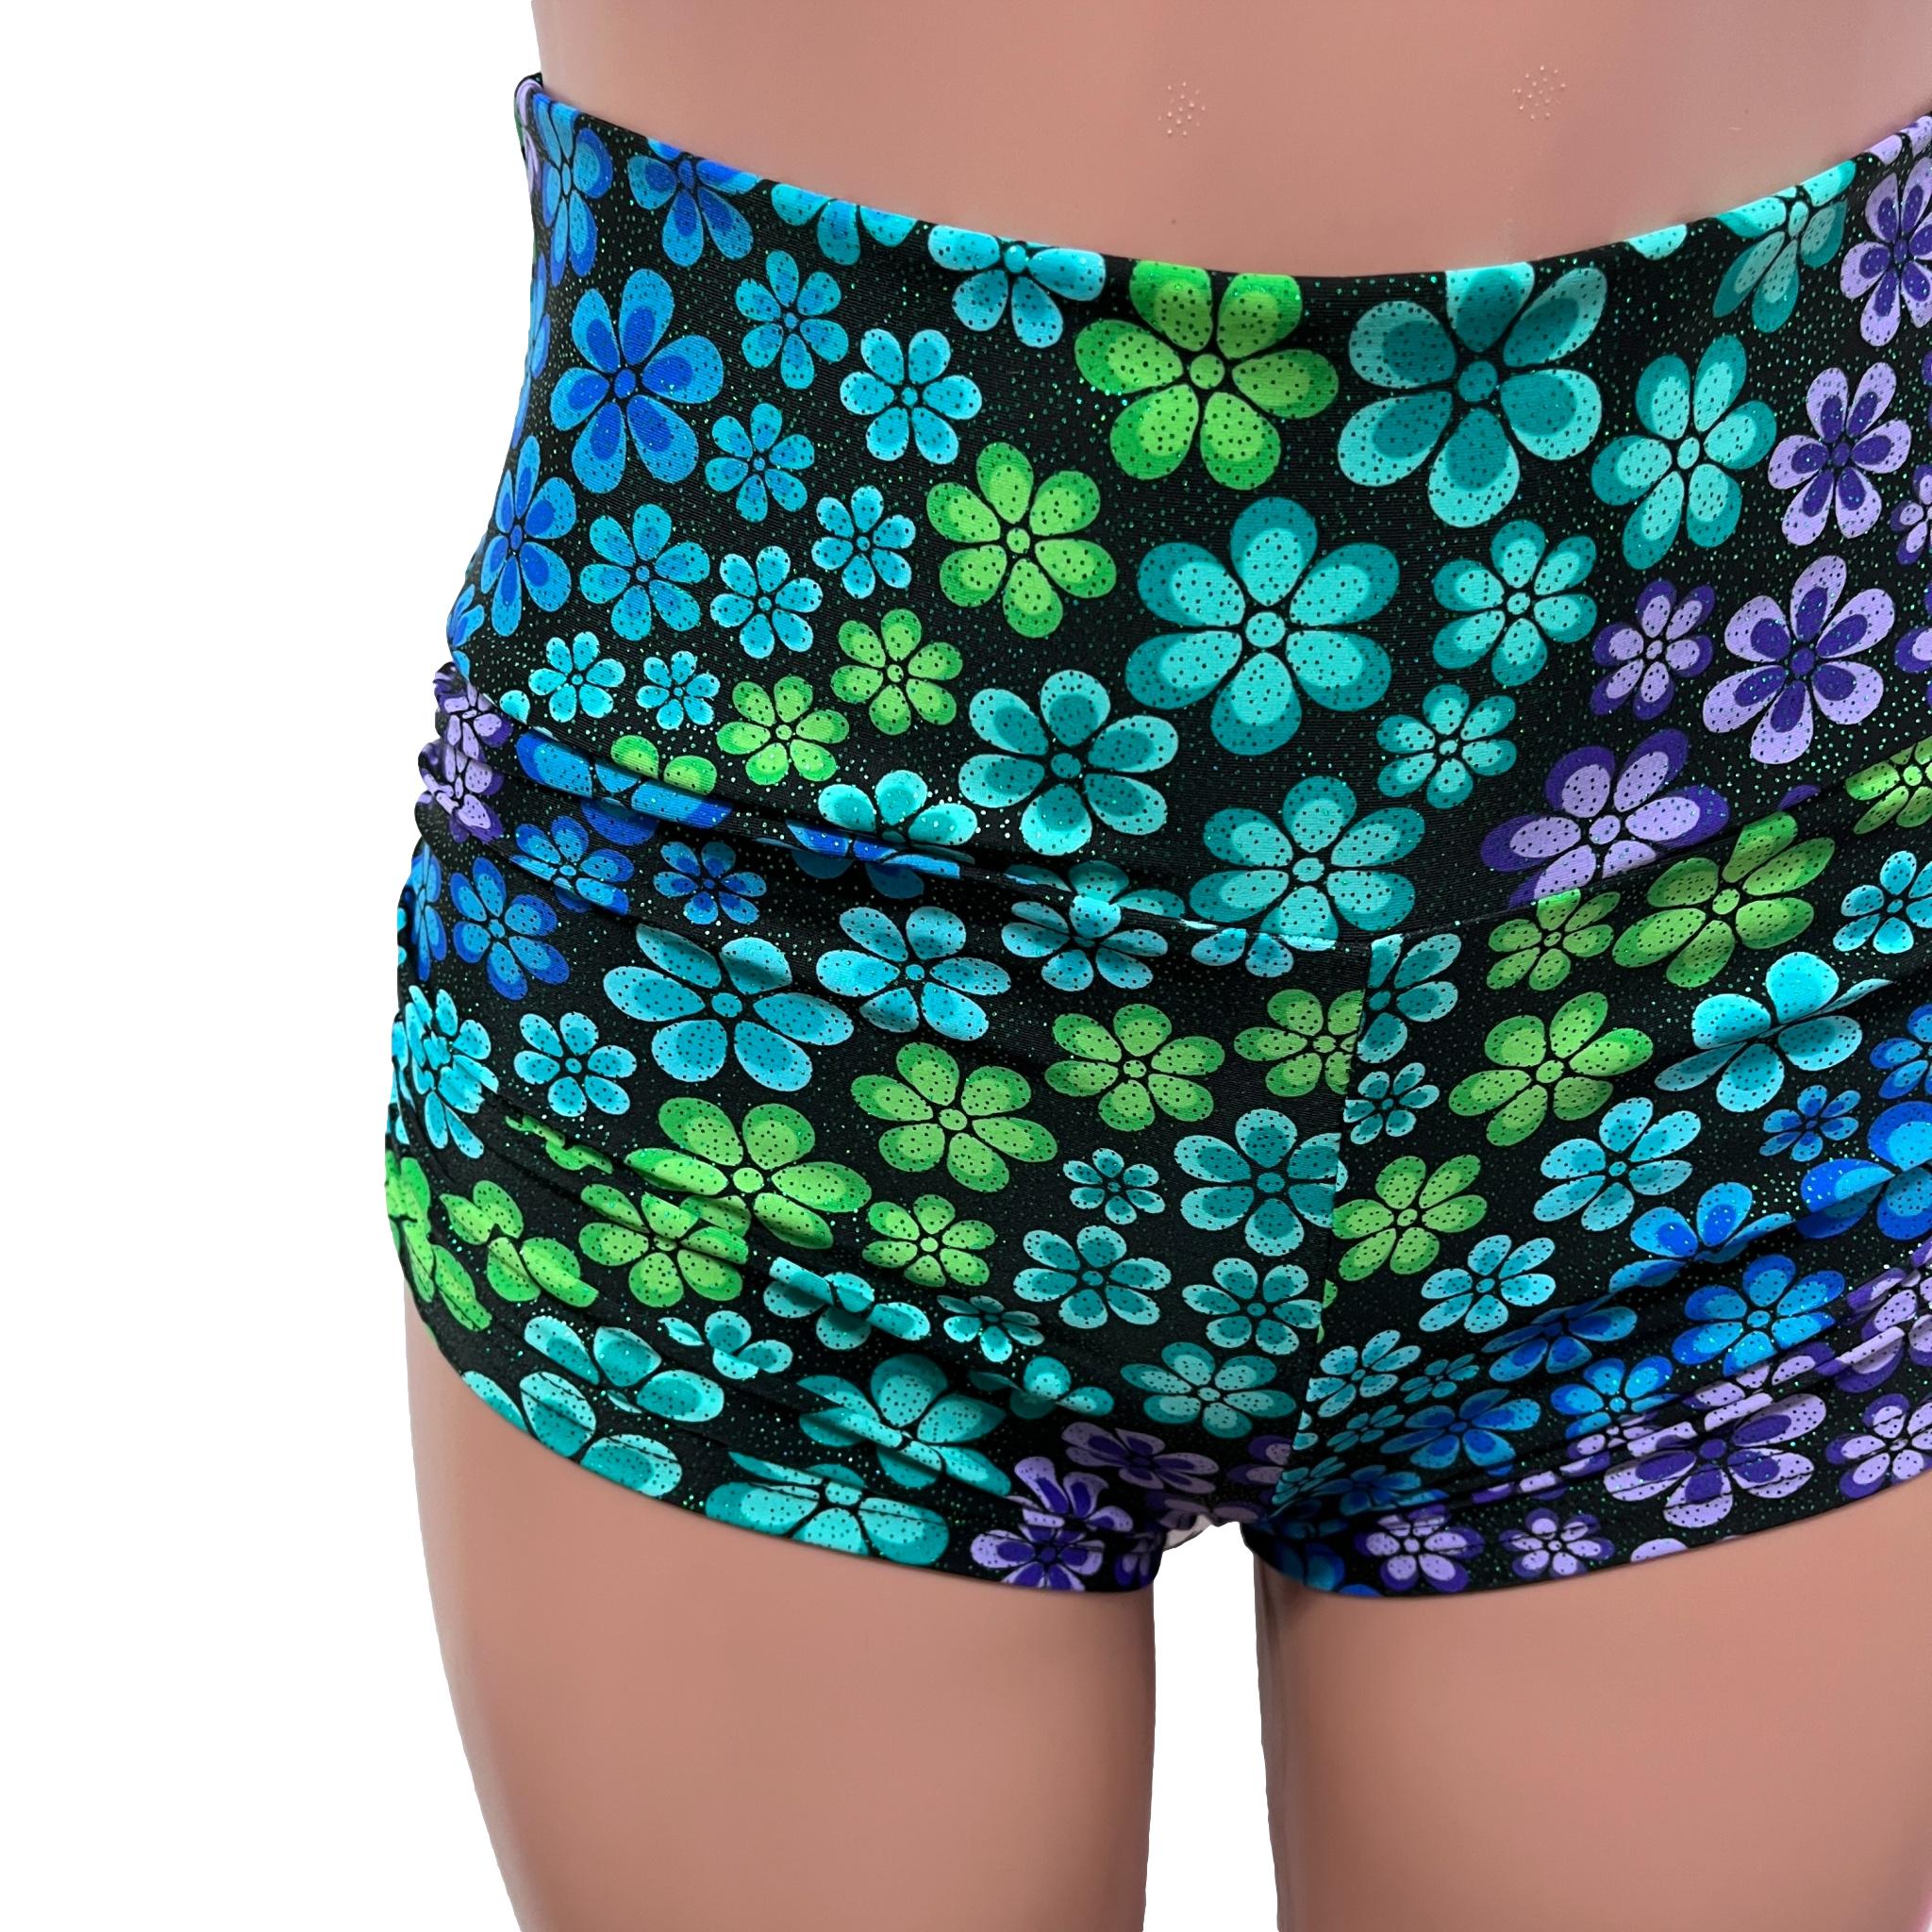 SALE - Ready to Ship - High Waist Ruched Booty Shorts in Groovy